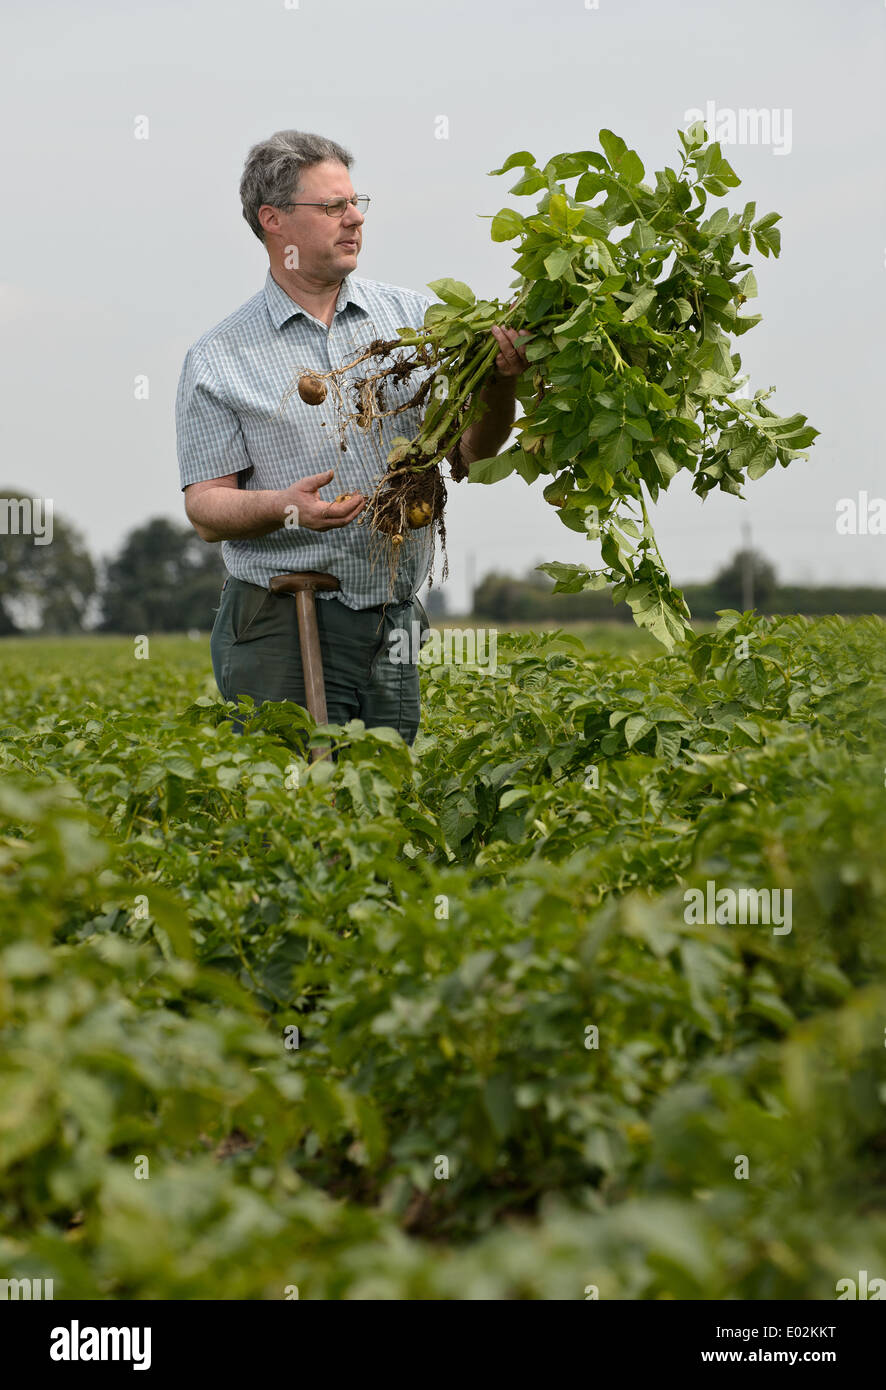 A farmer pulls up a root of fresh potatoes in a field in Lincolnshire, England, UK Stock Photo